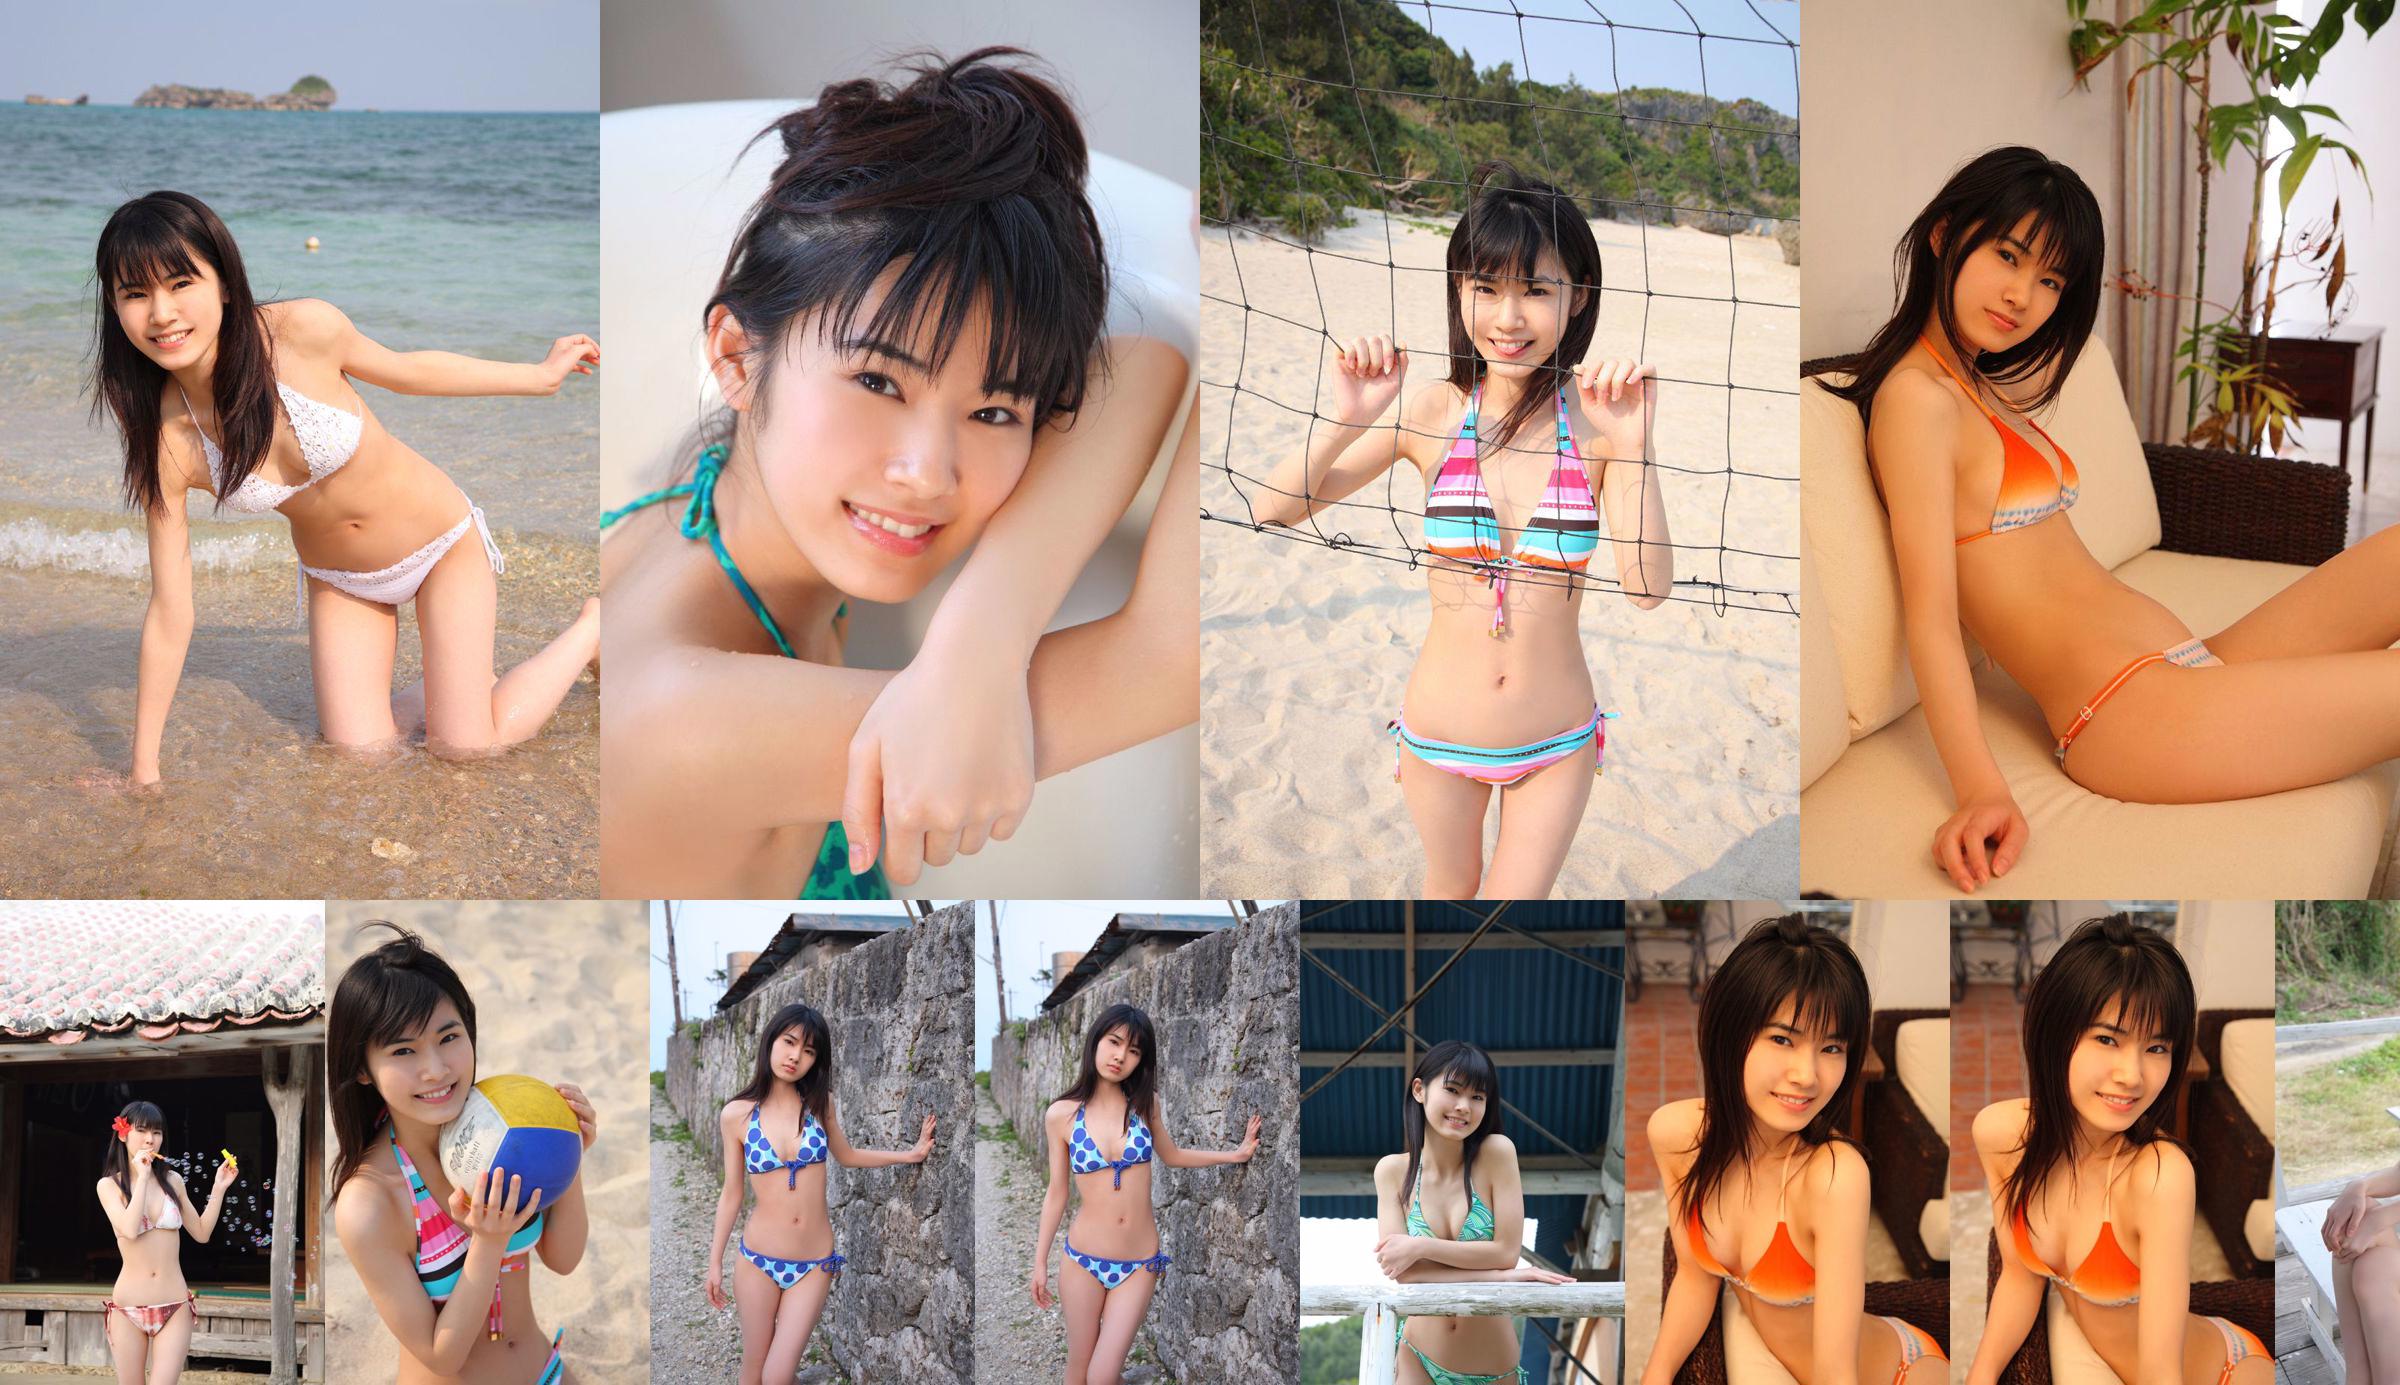 Mai Iwata "My ☆ Remembrance Day" [For-side] No.79ad18 Pagina 1